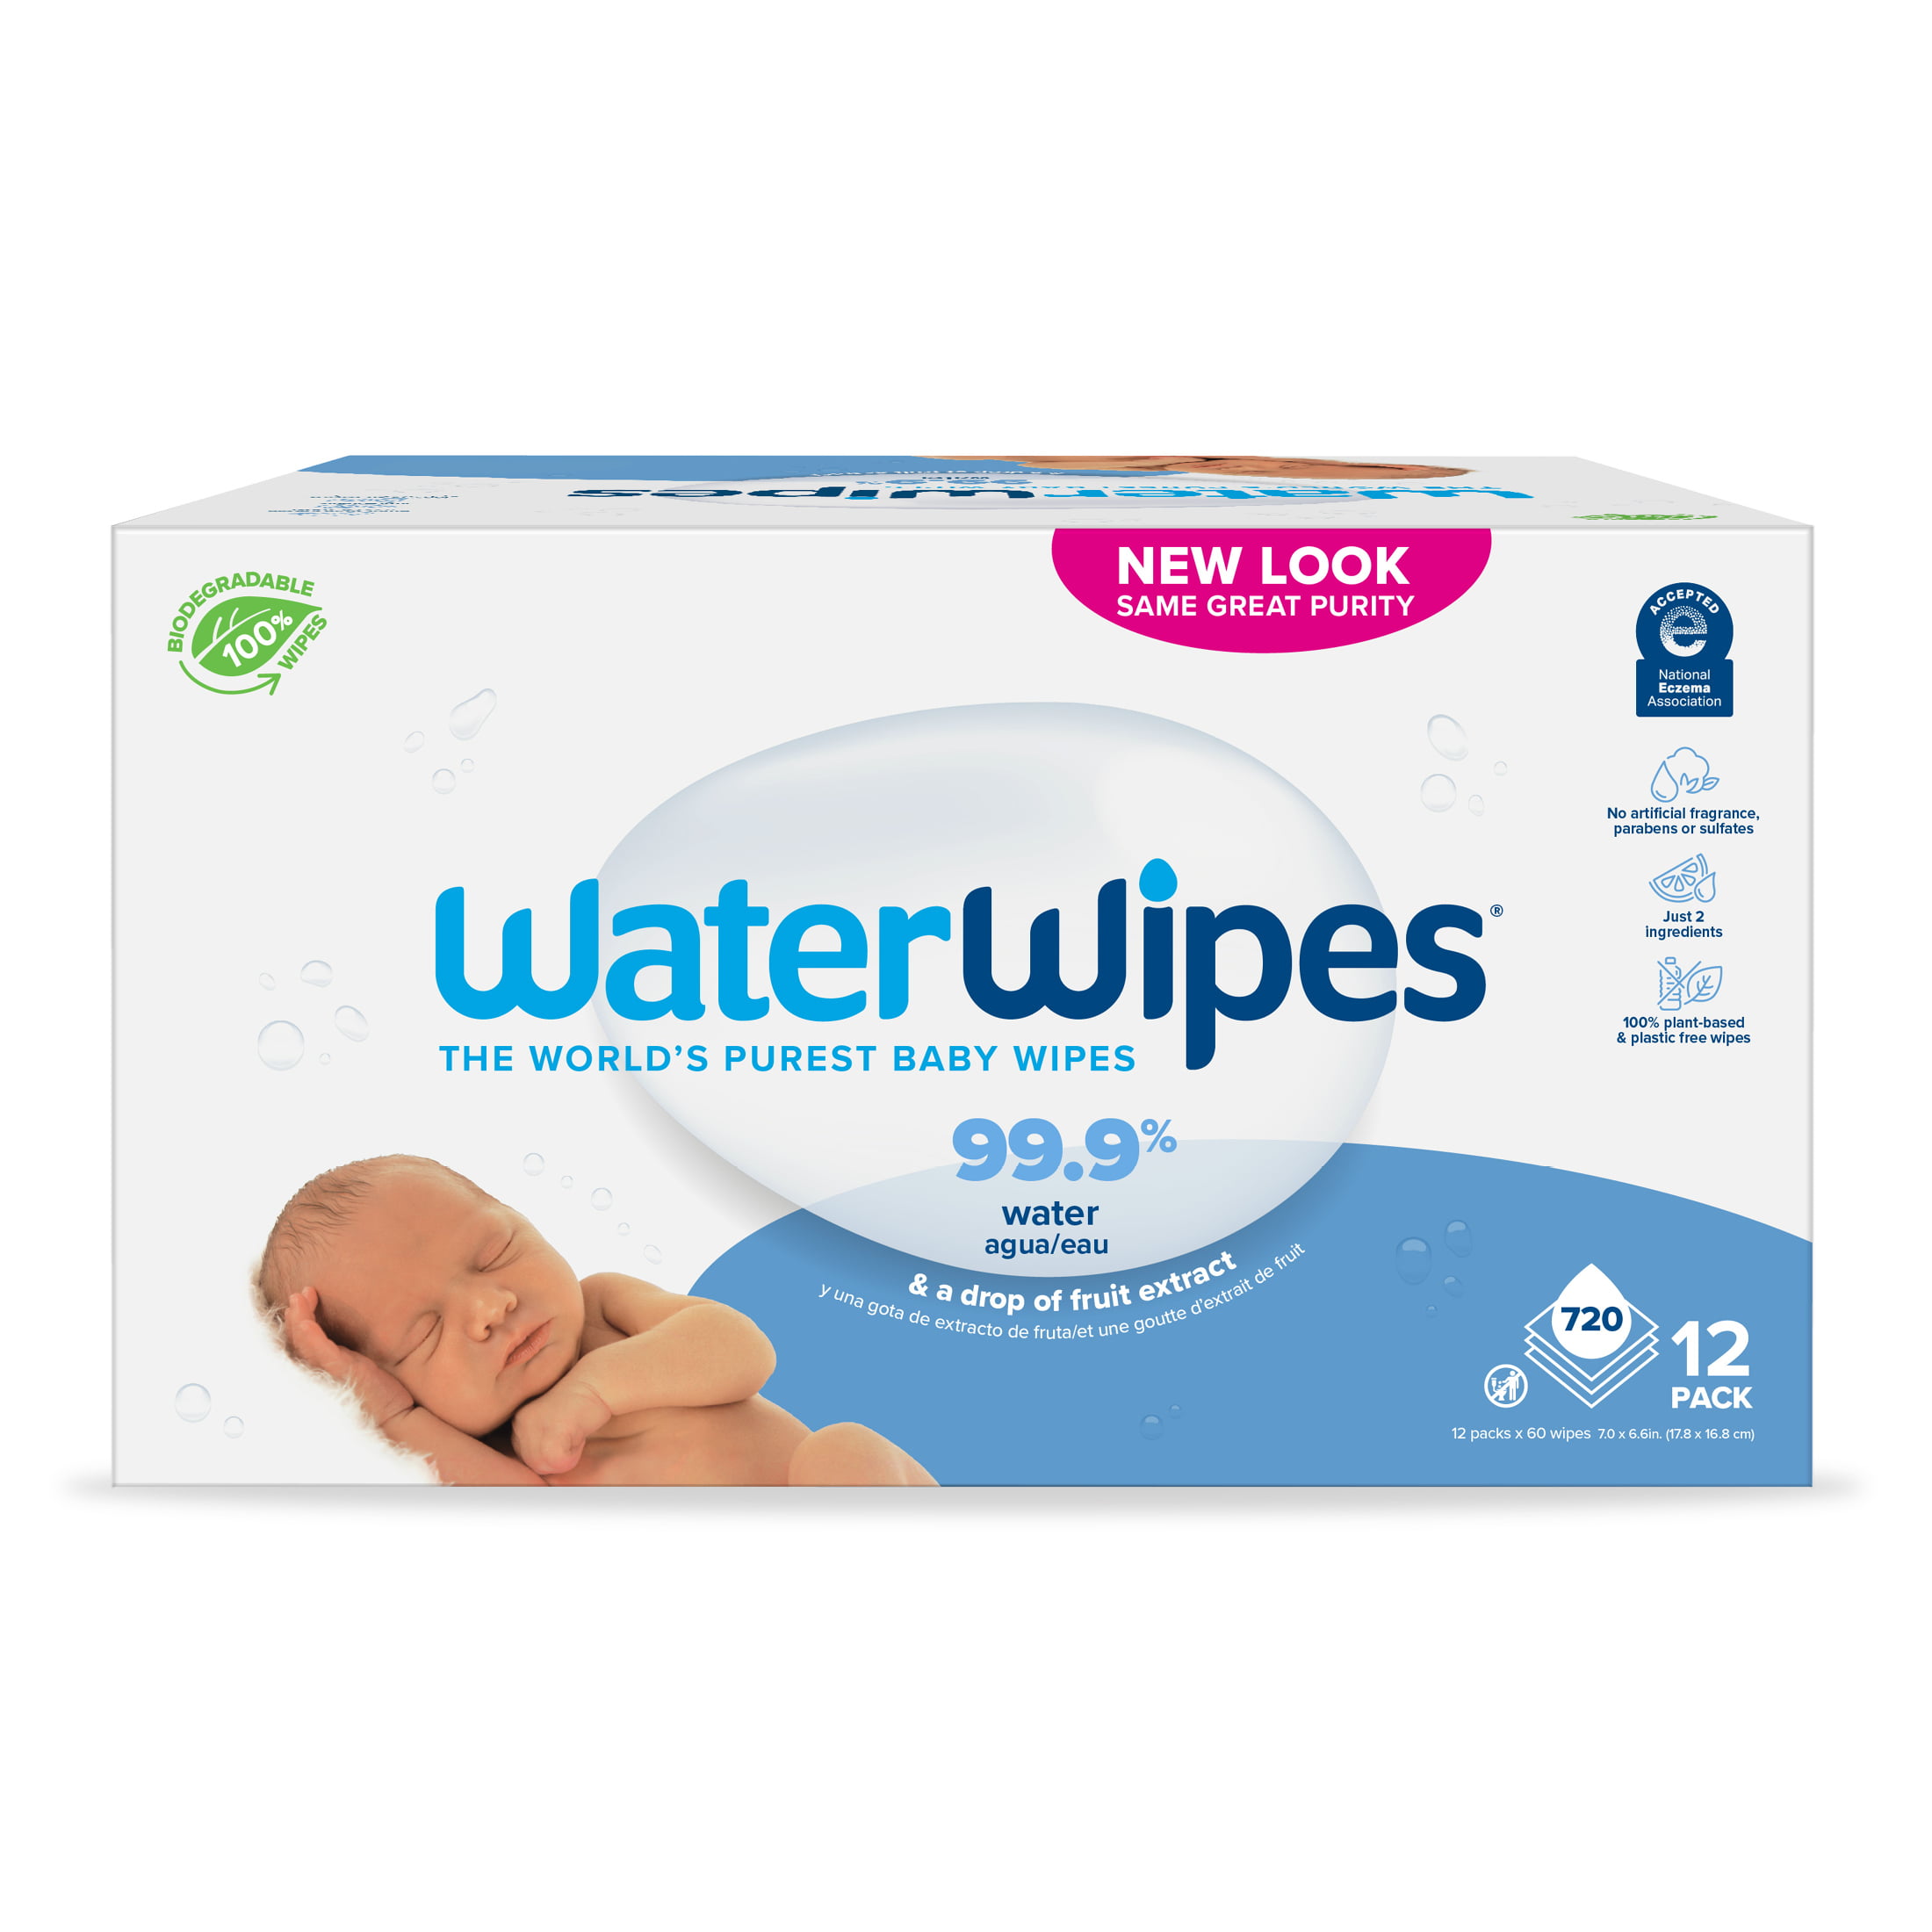 CHEMICAL FREE SENSITIVE BABY WIPES WATERWIPES CHOOSE YOUR PACK SIZE! 